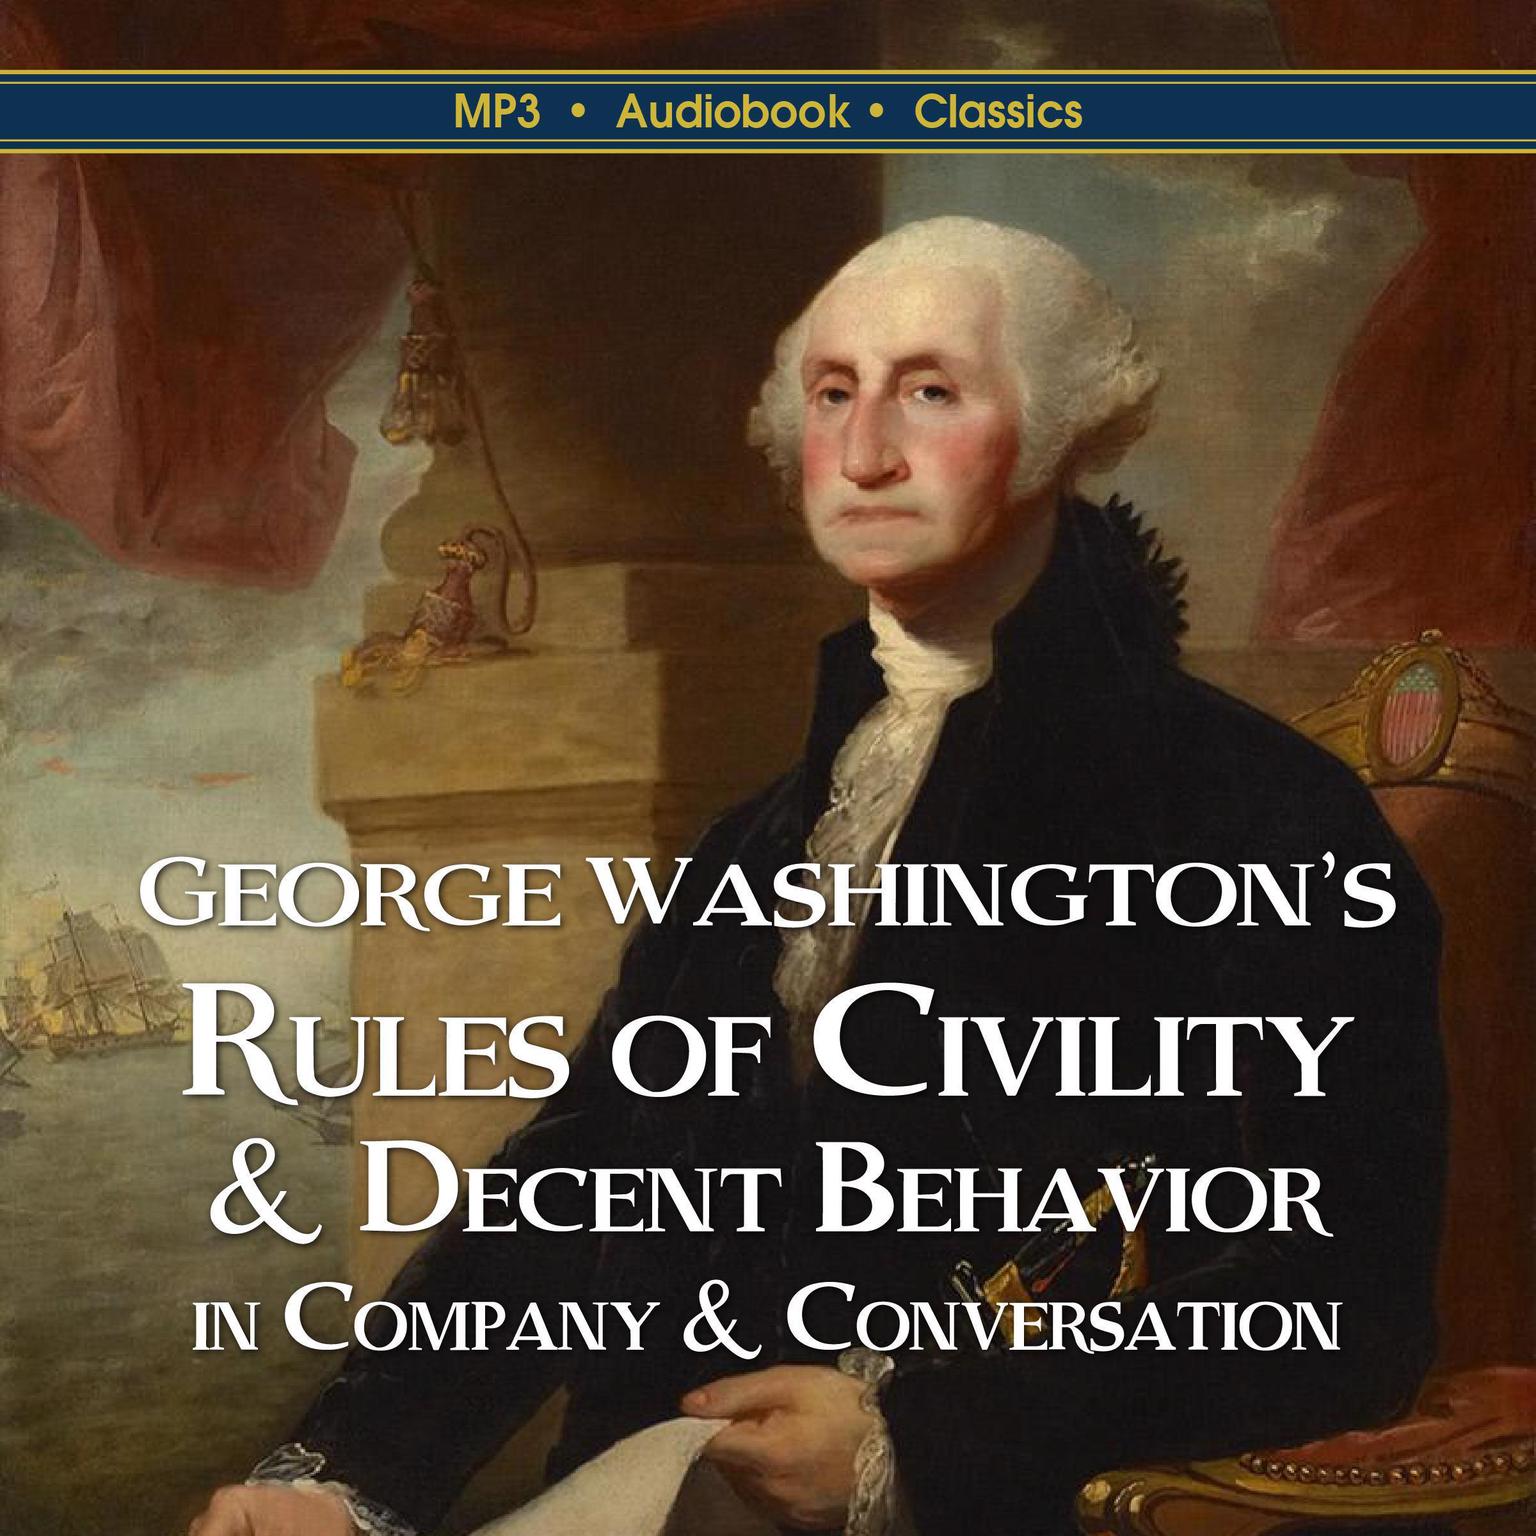 George Washington’s Rules of Civility & Decent Behavior  In Company & Conversation Audiobook, by George Washington